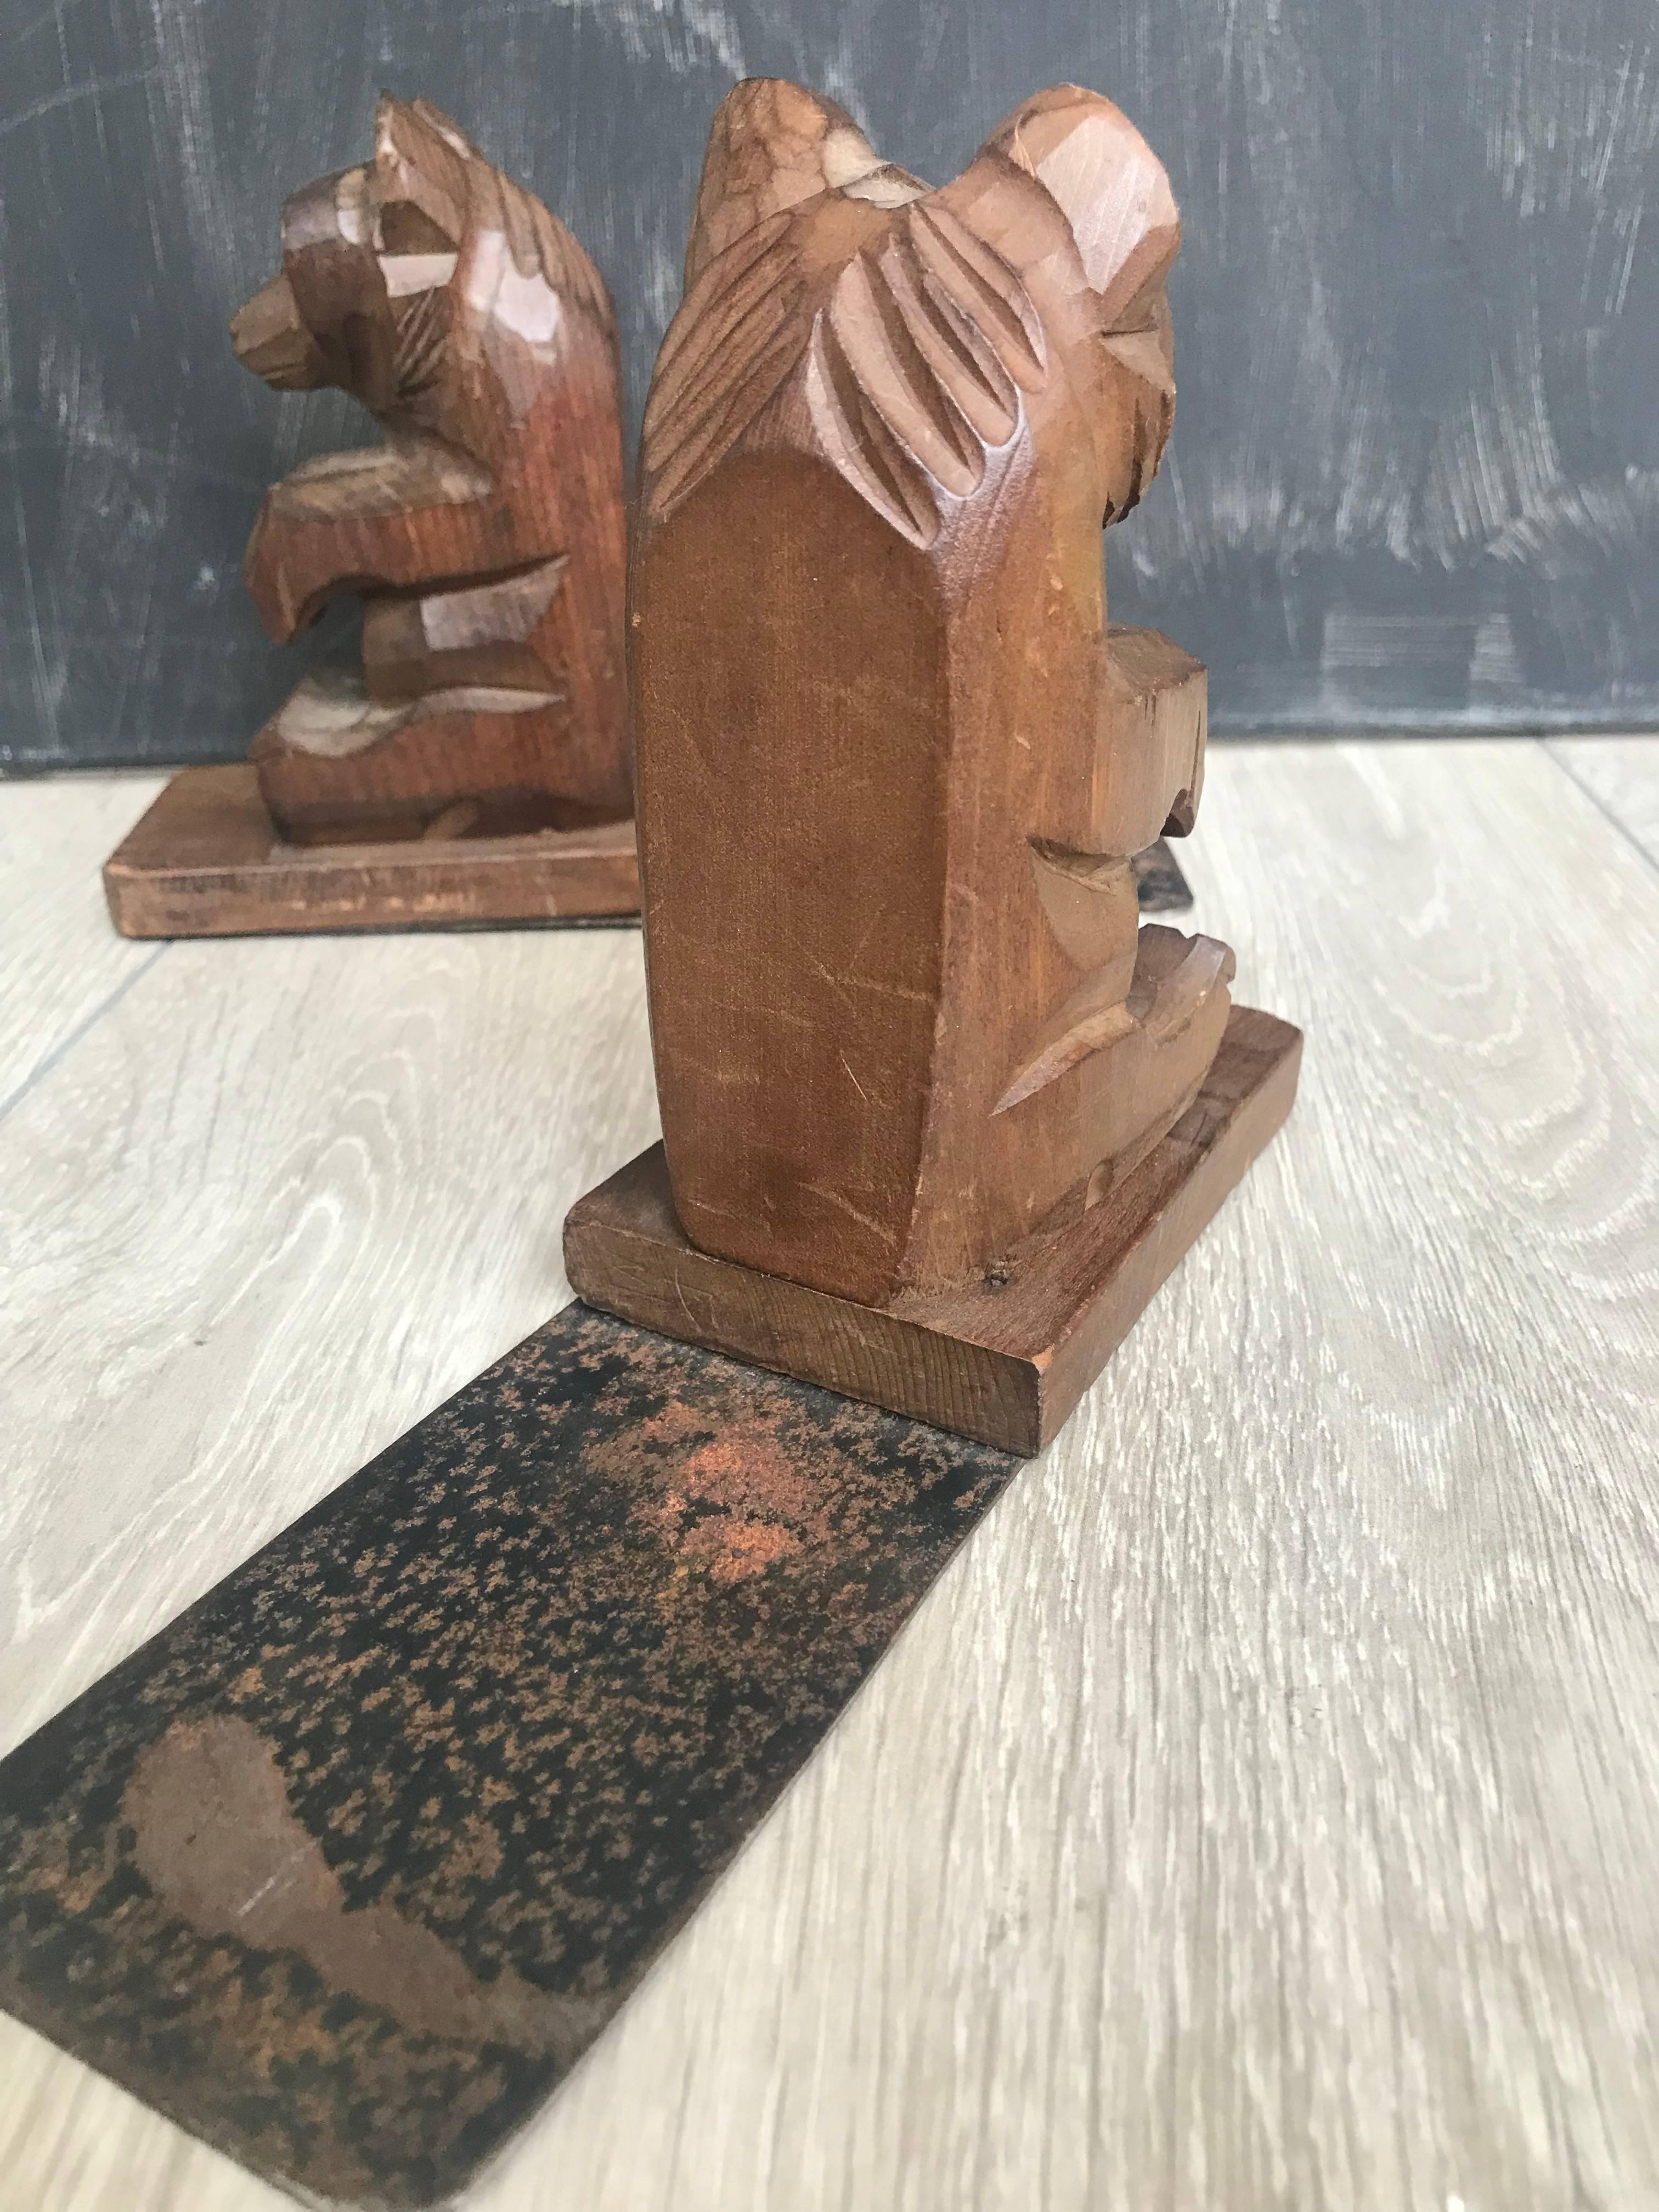 Rare and nice quality carved sitting bear bookstands. 

These hand-carved bears with their curiously looking eyes are beautiful in both shape and color and they are a joy to own and look at. It is as if they have just performed a trick and they are